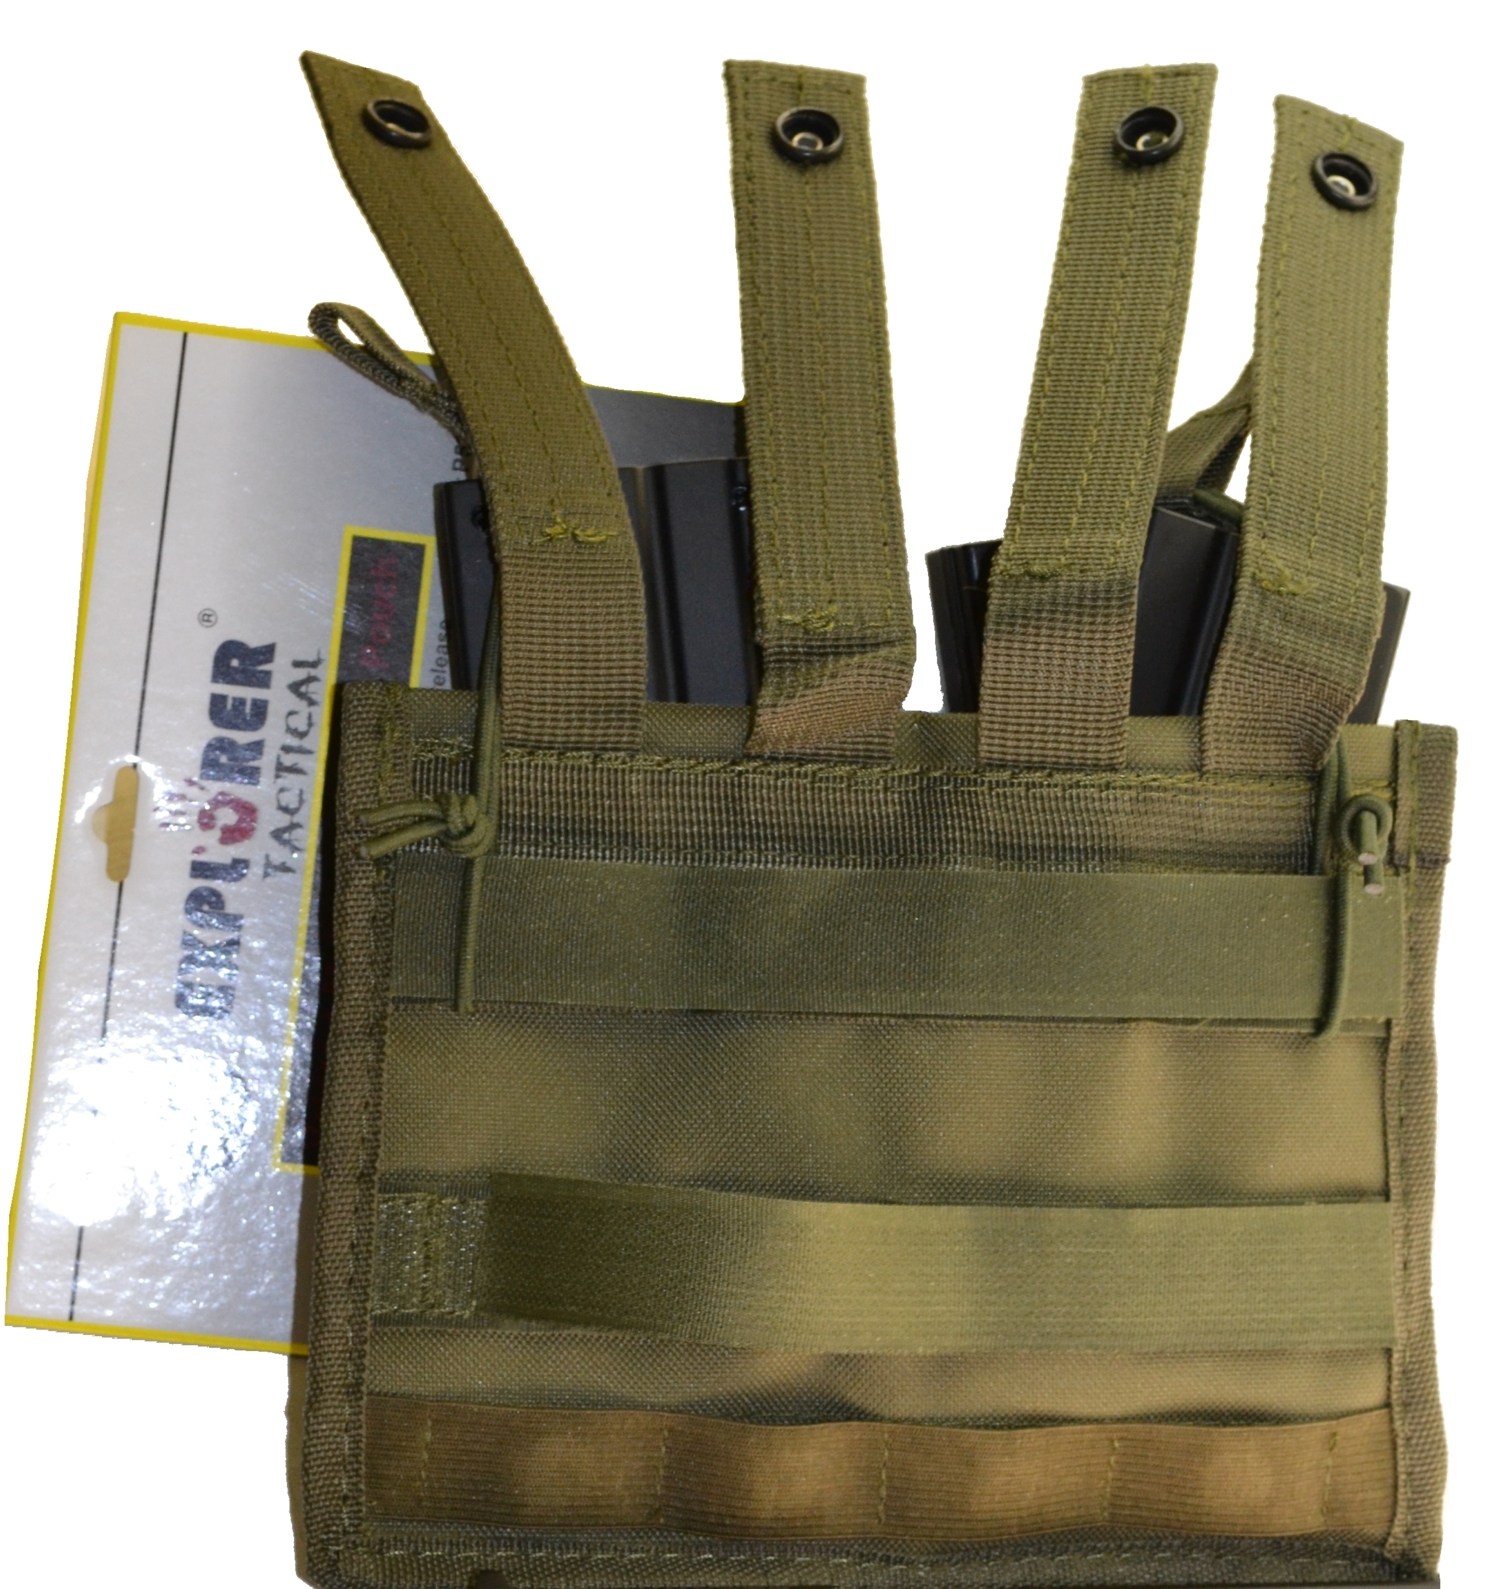 P12 P52 Double AR Mag Pouch Black, ACU Tan, OD Mc Adjustable in size